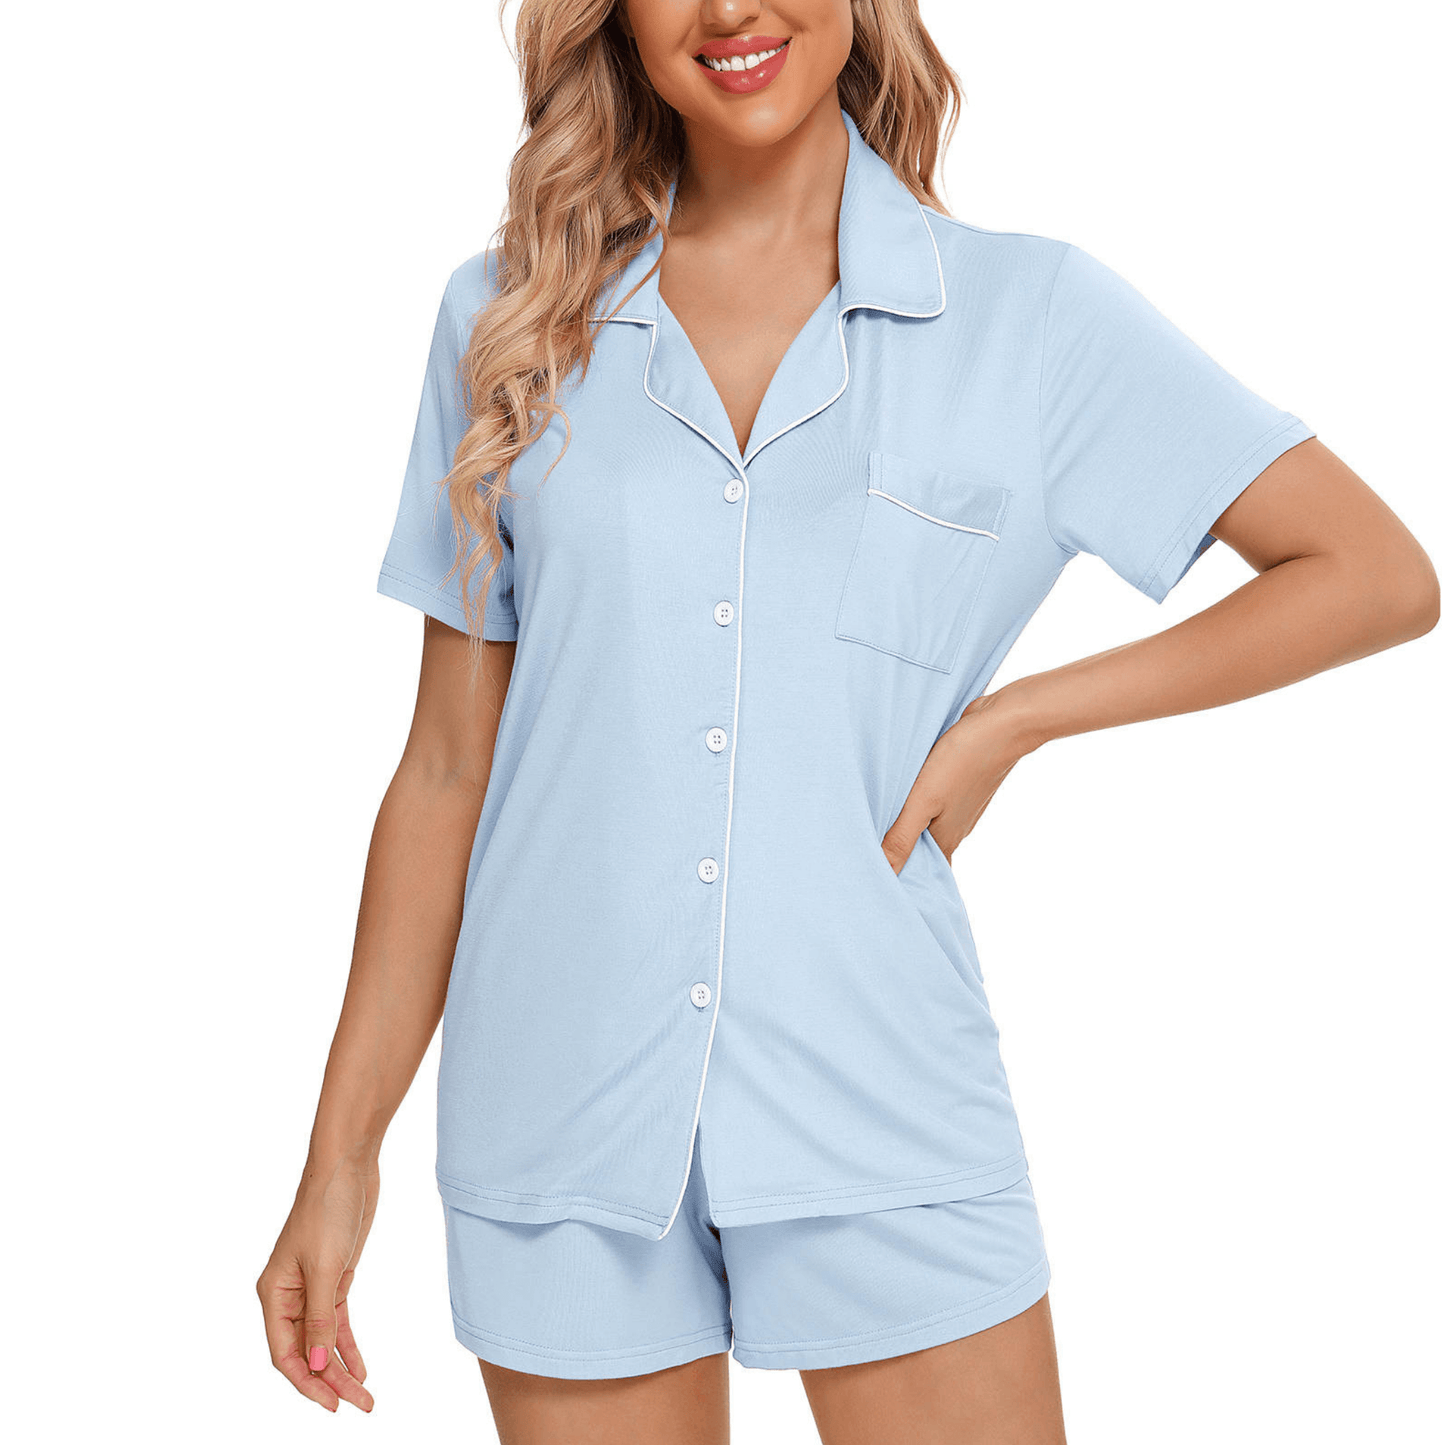 Luxuriously soft and silky short bamboo pyjama sets in baby blue and white contrast piping